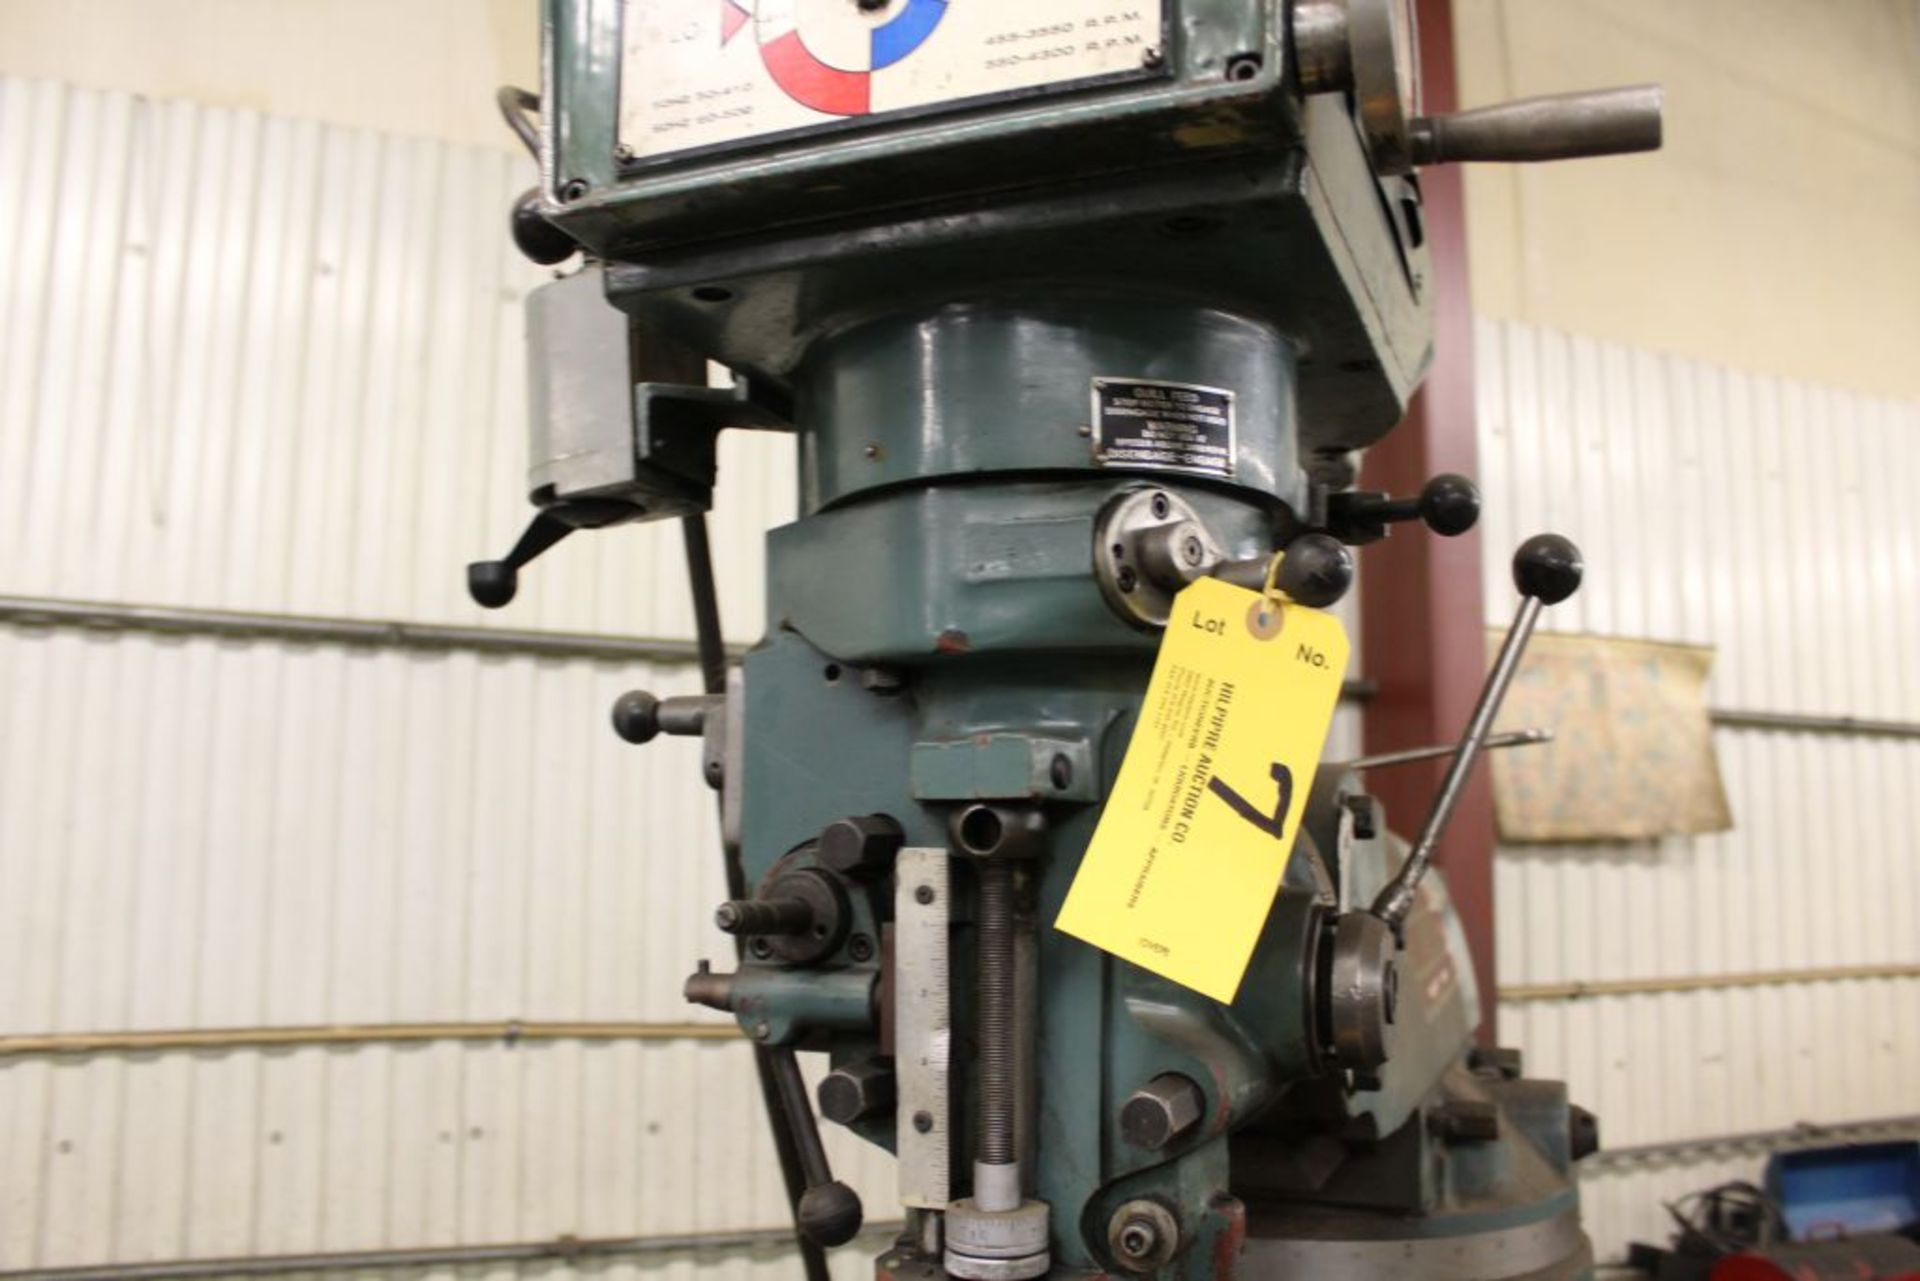 Amstar vertical mill model BPV3942, parts machine. - Image 2 of 2